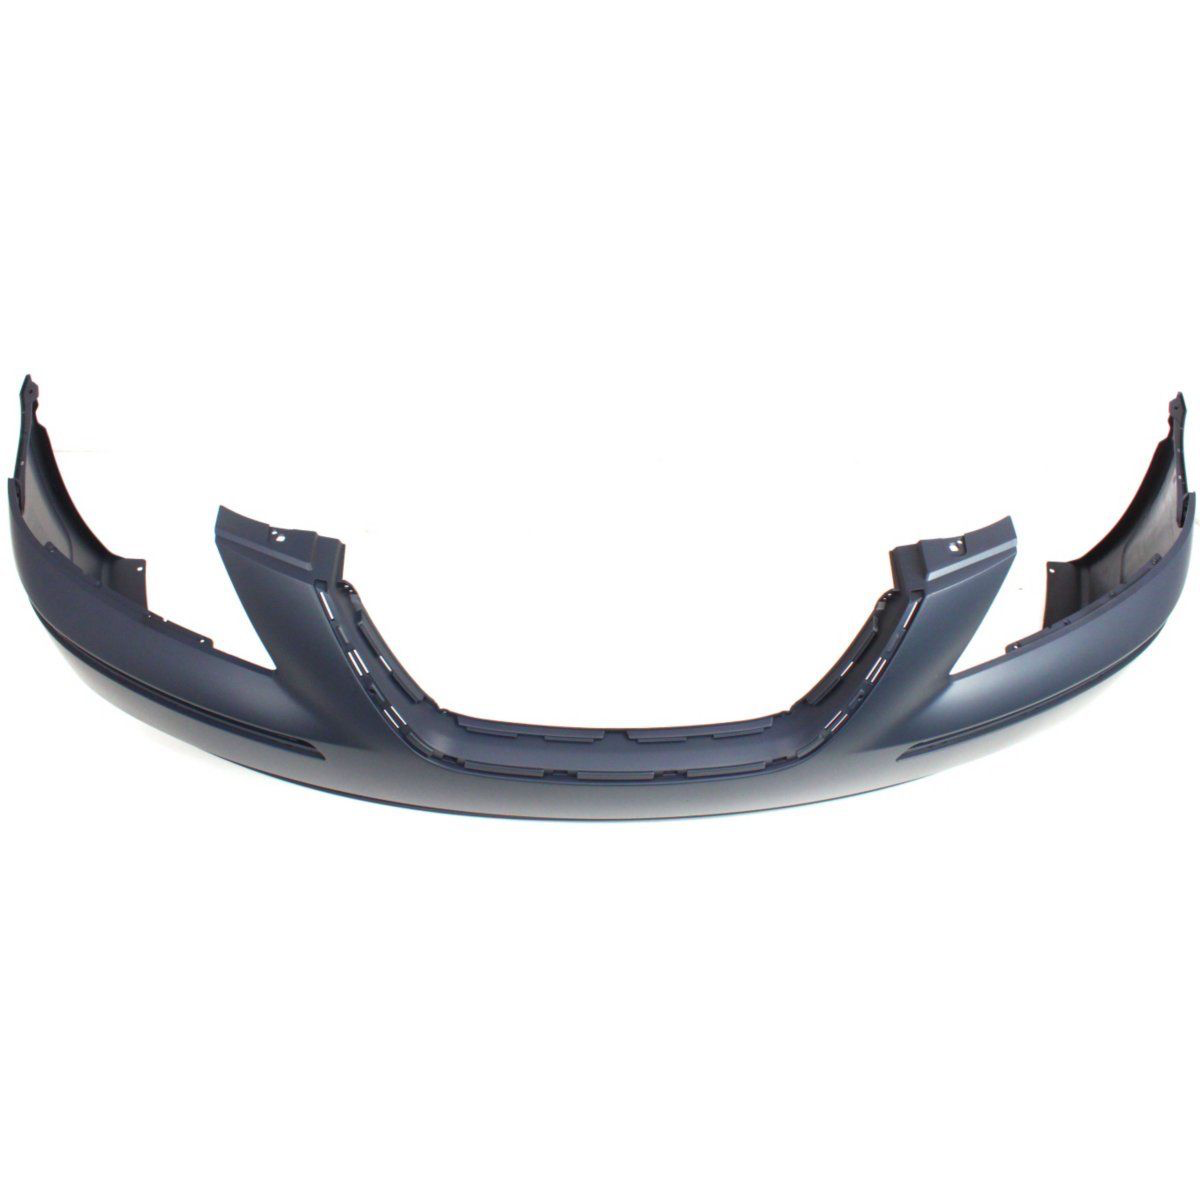 2009-2010 HYUNDAI SONATA Front Bumper Cover Paint To Match Painted to Match